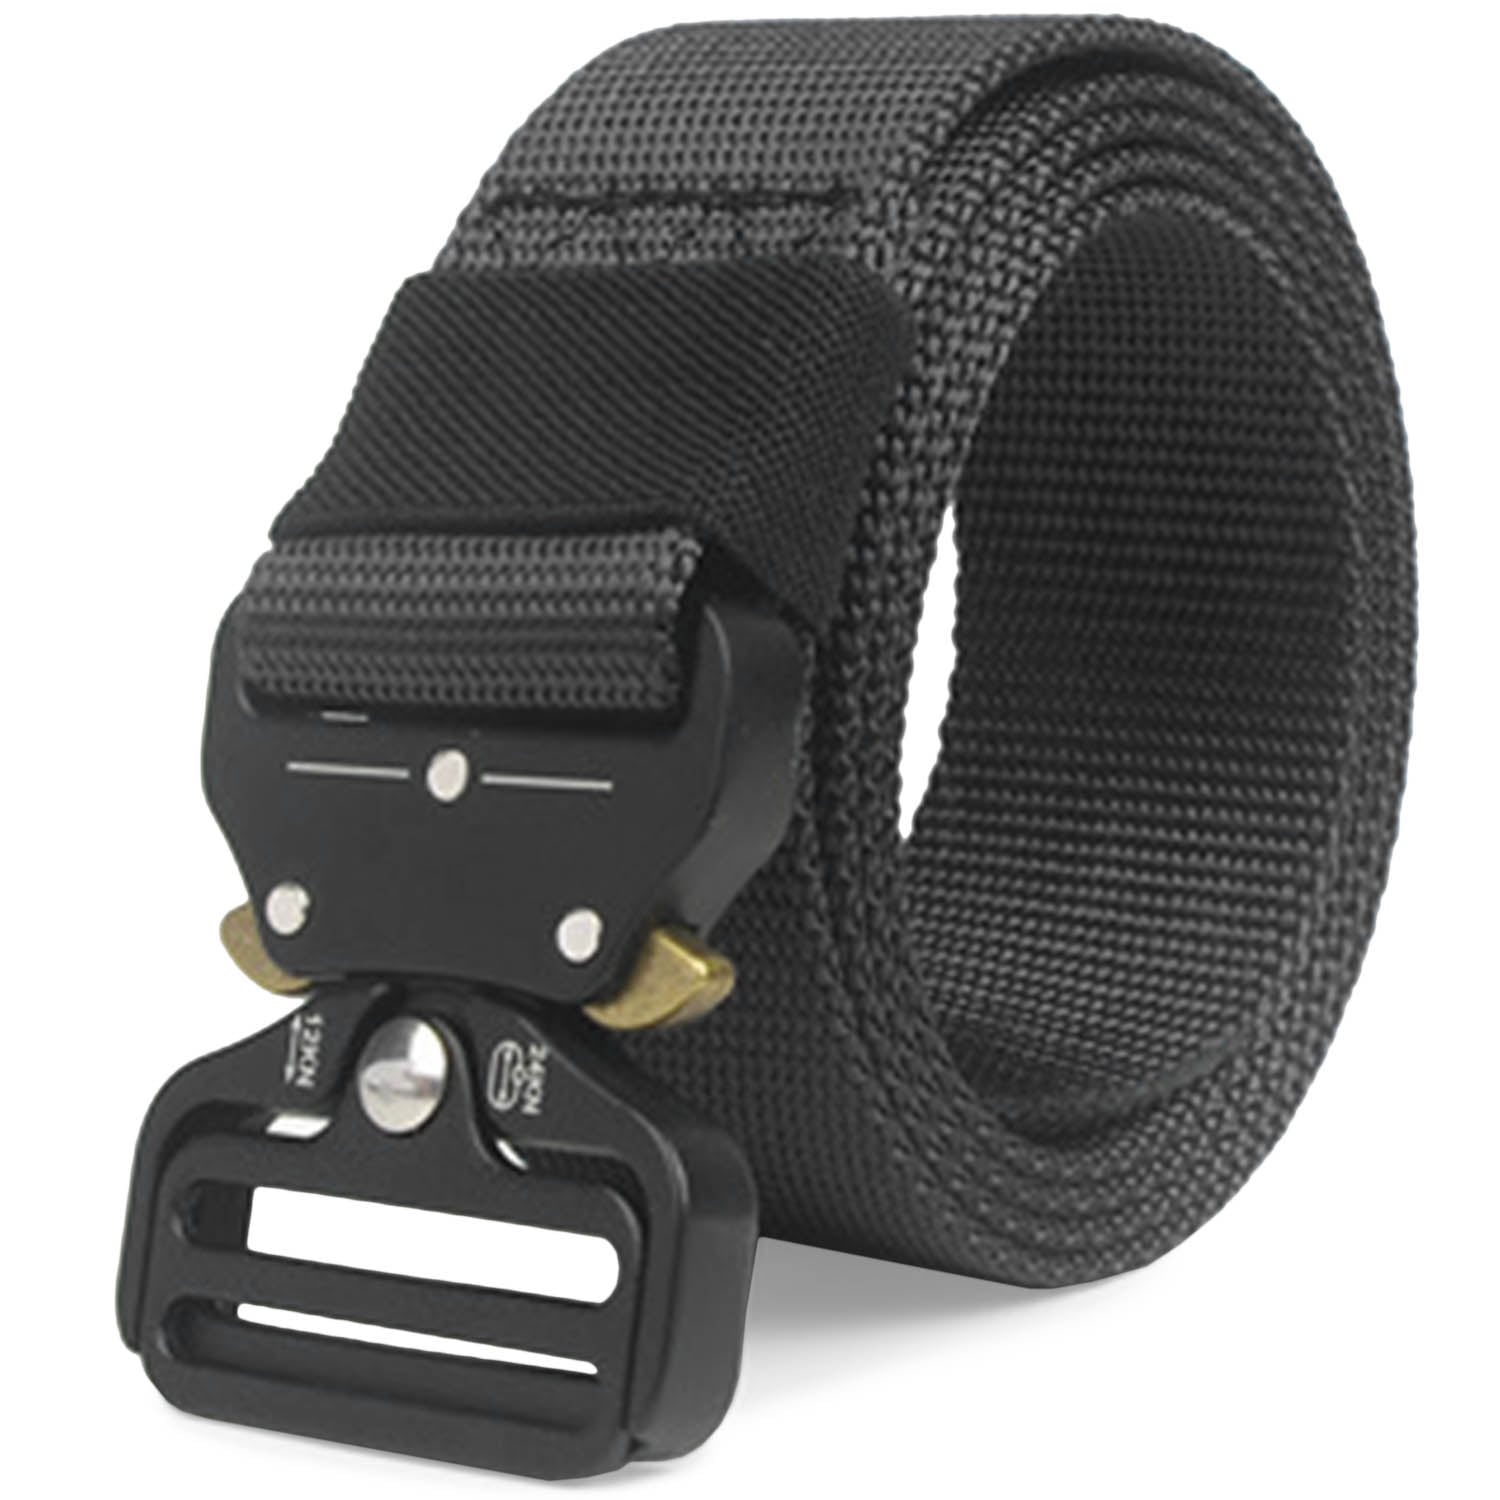 Tactical Belt Utility Belt Military Belt with Quick-Release Buckle & Accessories